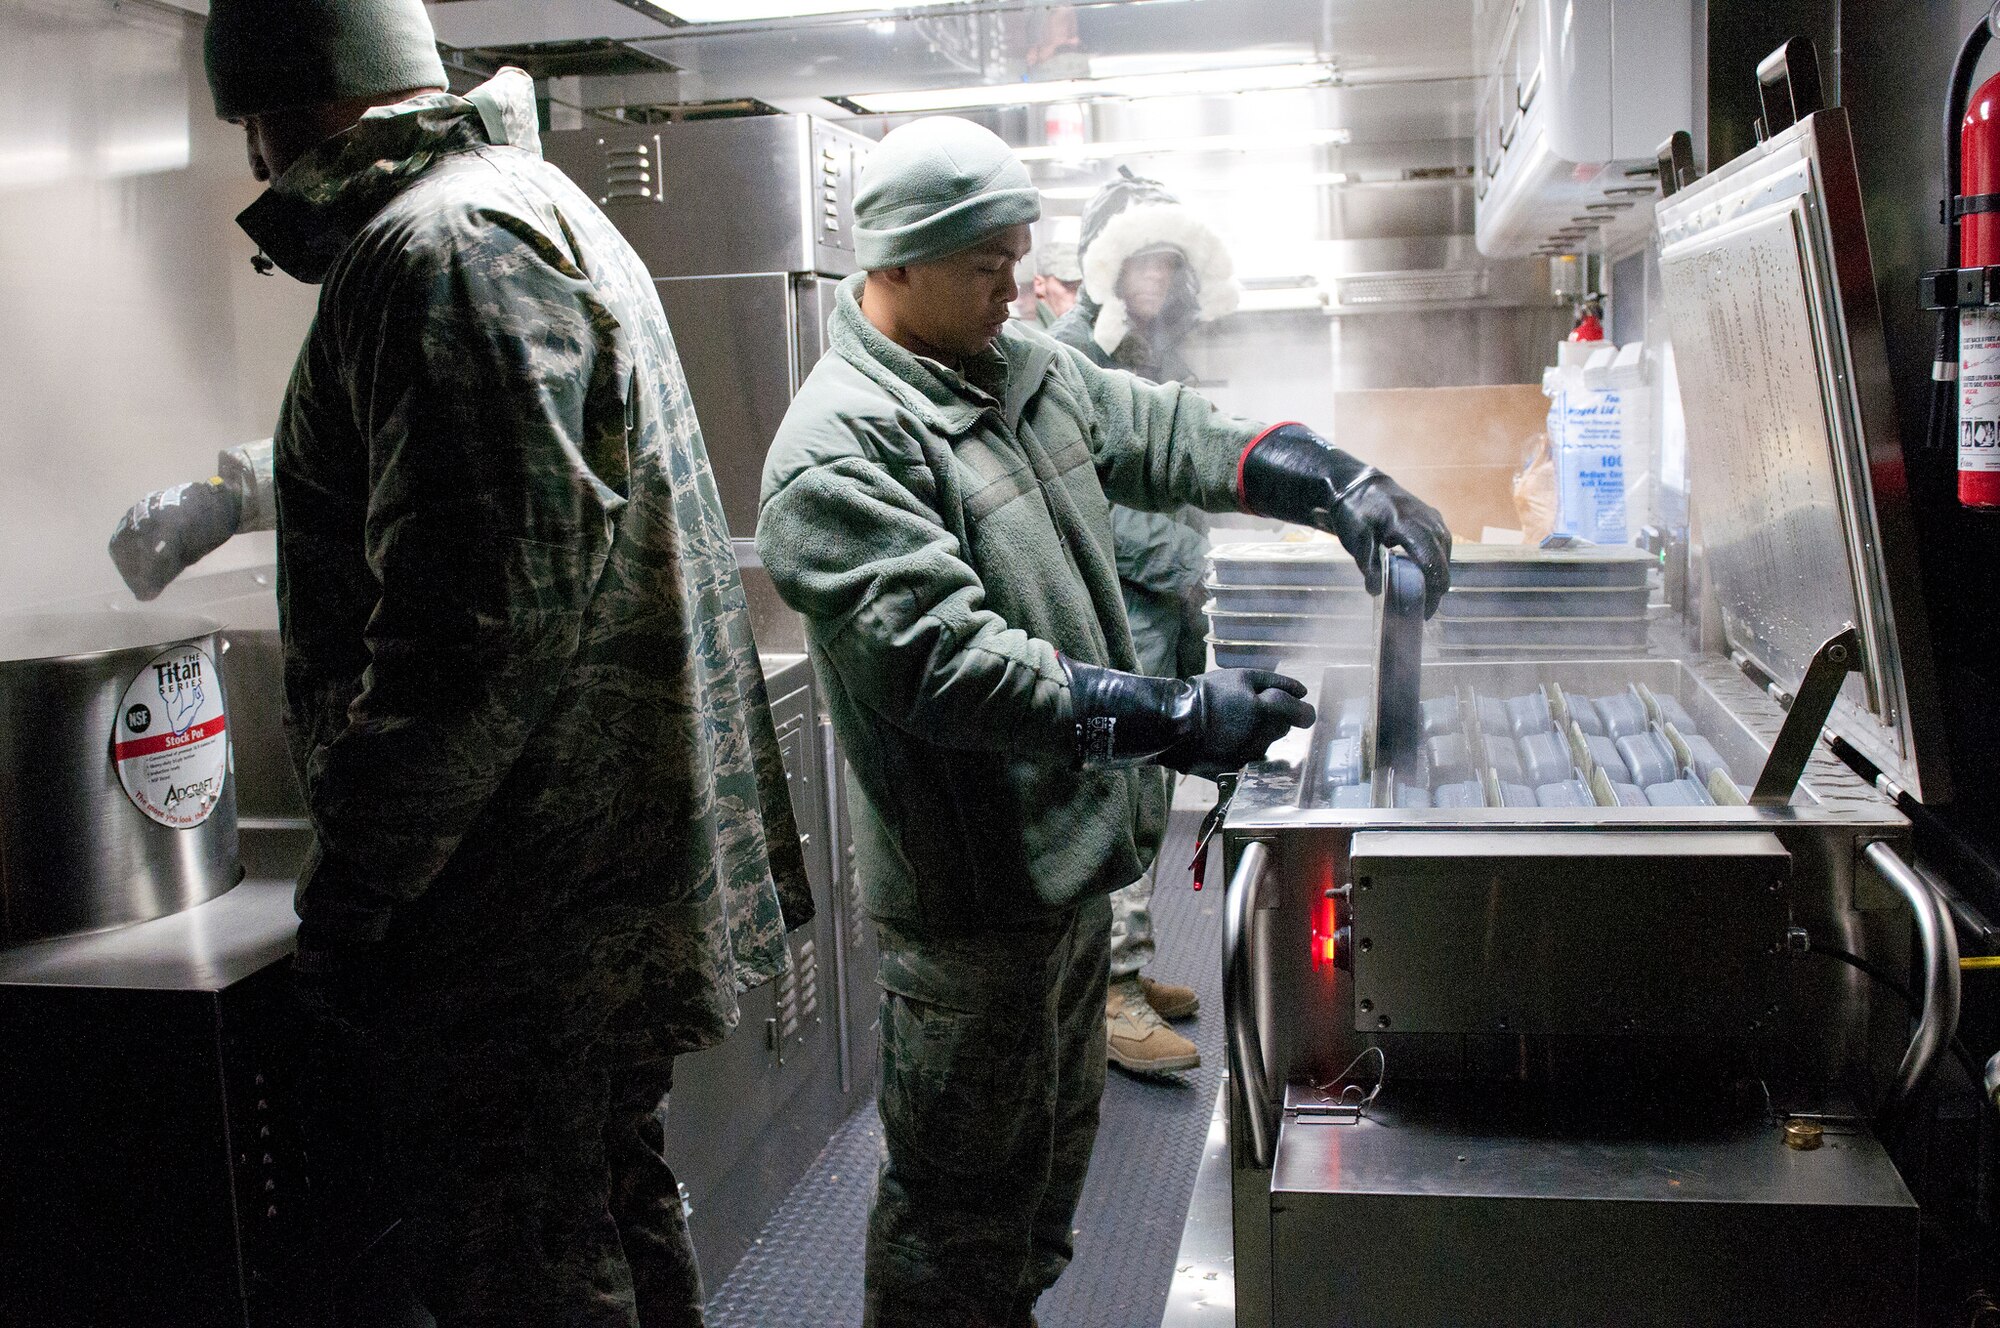 Members of the Kentucky Air National Guard’s 123rd Force Support Squadron prepare meals for deployed Soldiers and Airmen at McKinley Technology High School in Washington, D.C., on Jan. 19, 2013. The Kentucky team served more than 1,800 meals from a Disaster Relief Mobile Kitchen Trailer. (Kentucky Air National Guard photo by Senior Airman Vicky Spesard)